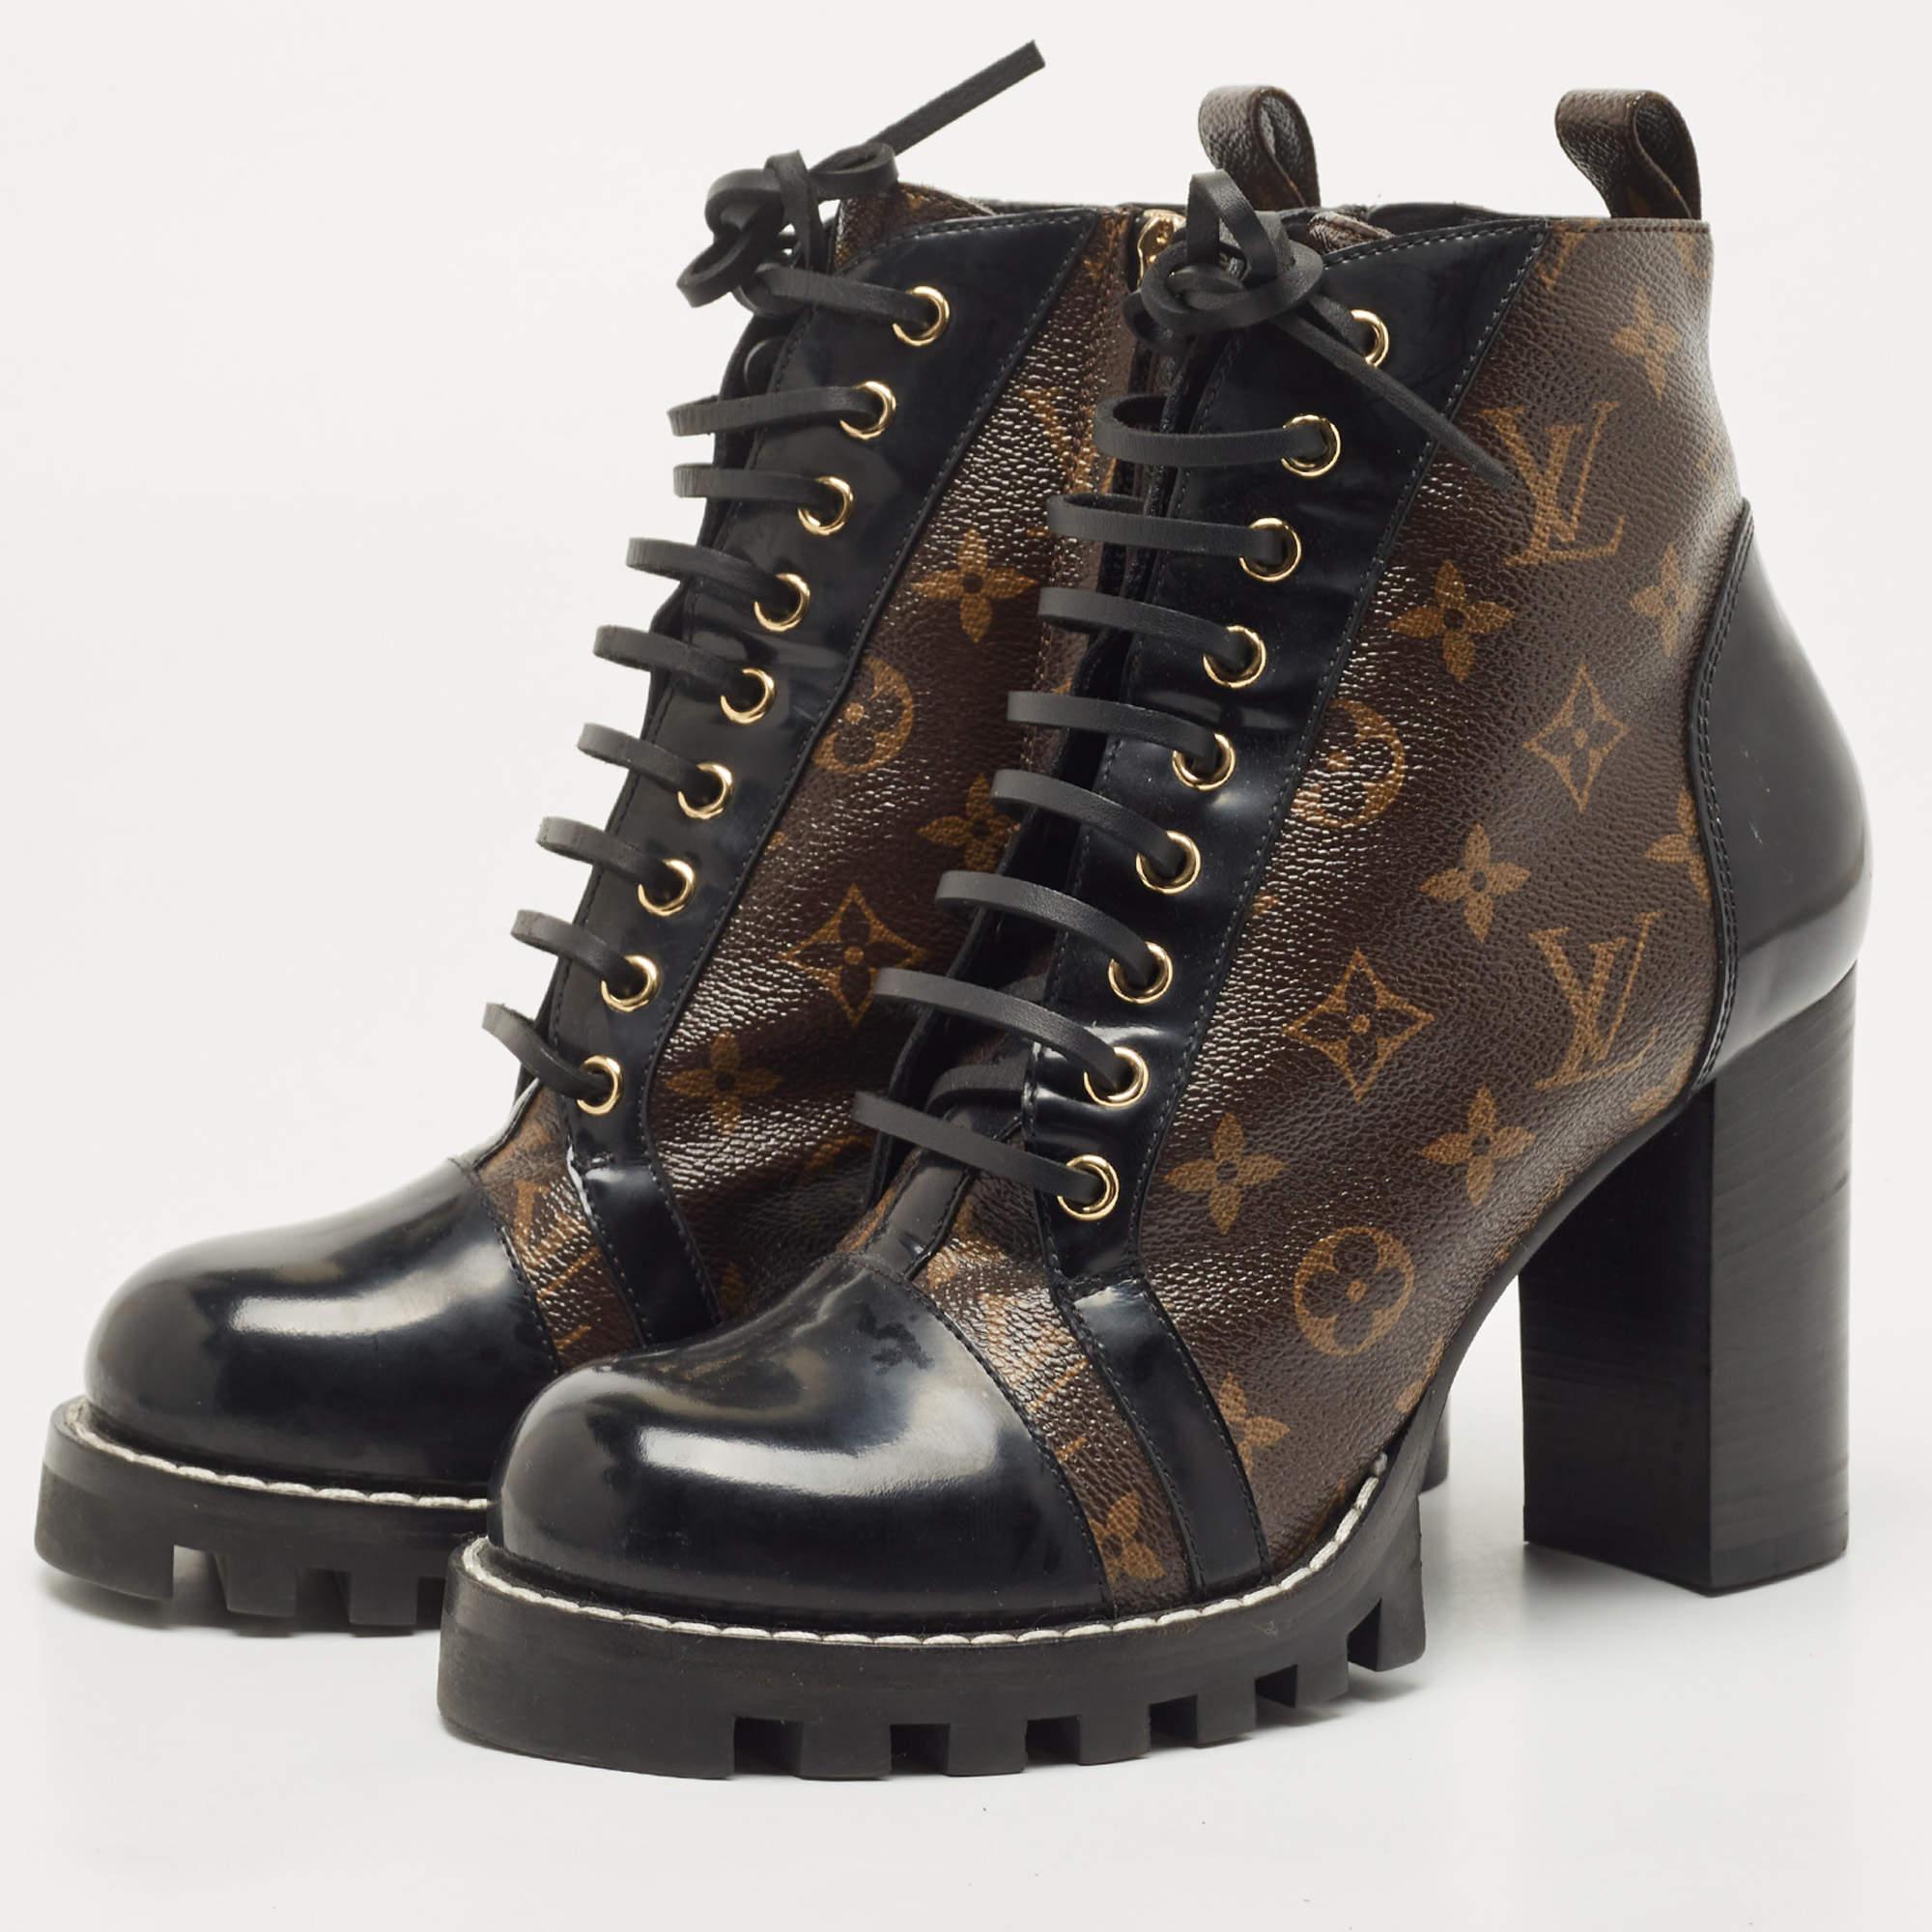 Louis Vuitton Black/Brown Leather and Monogram Boots Size 40 1